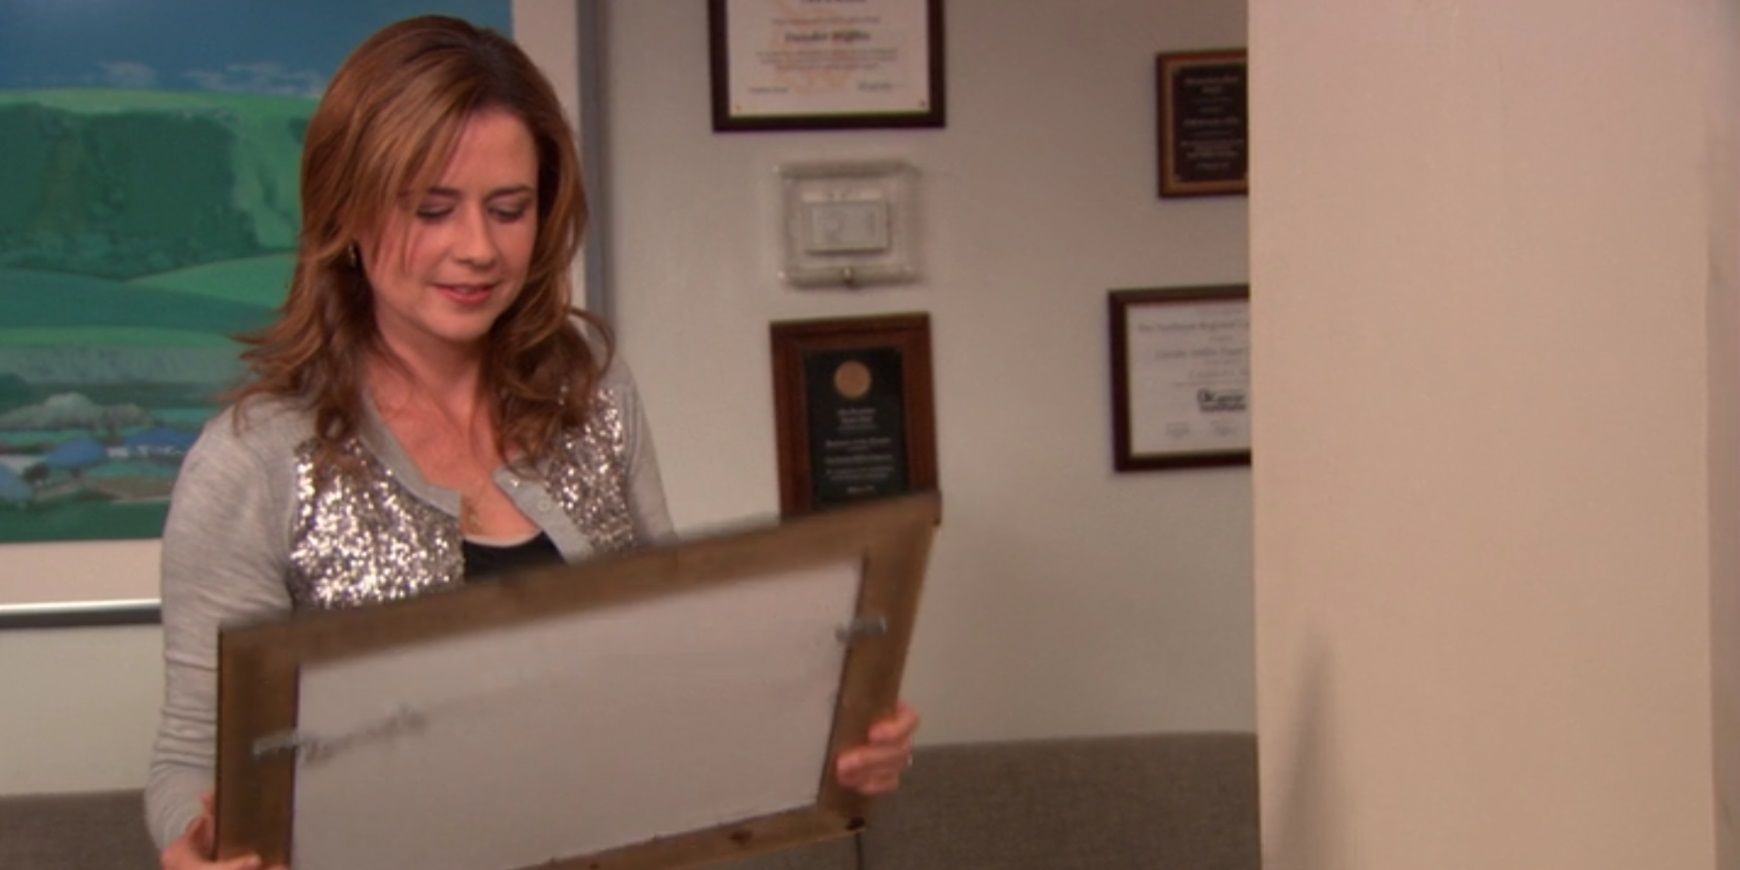 Pam in The Office finale